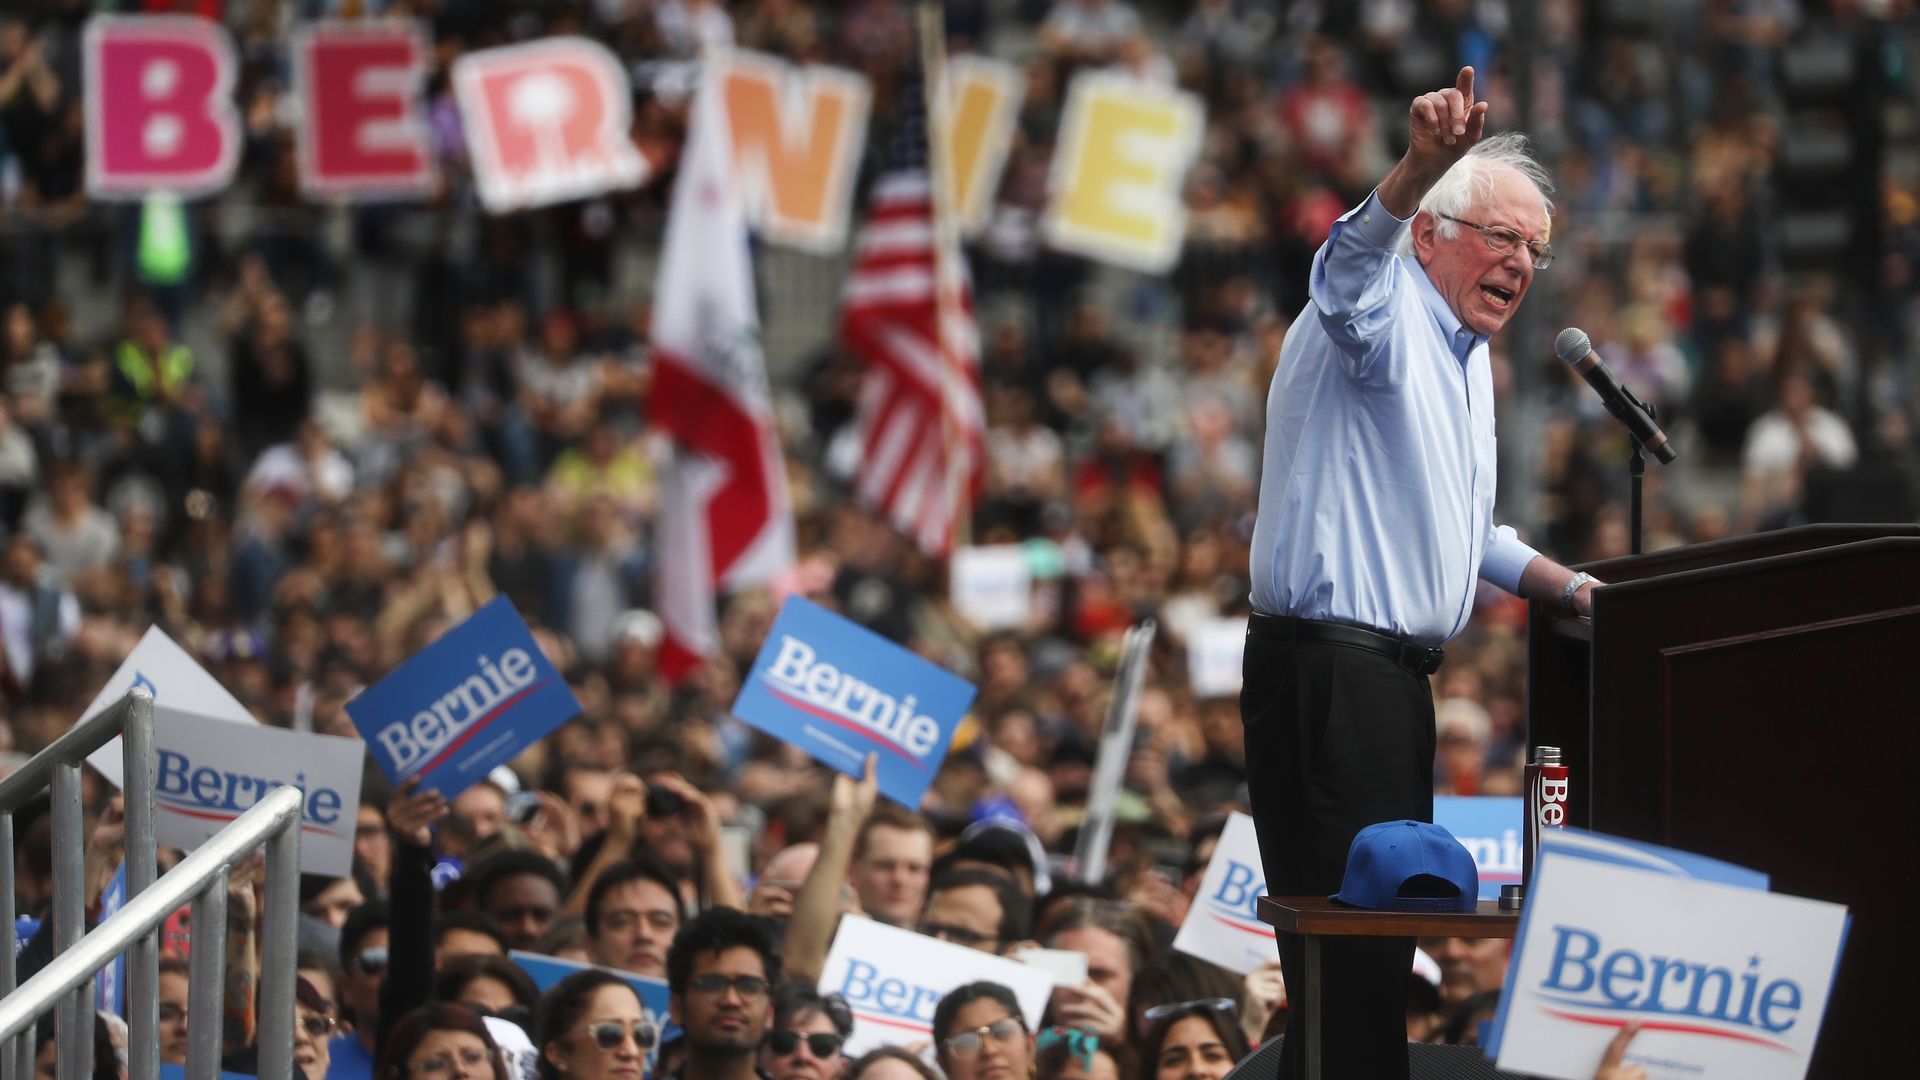 Bernie Sanders paid a visit to a Los Angeles mosque while campaigning in California Saturday.